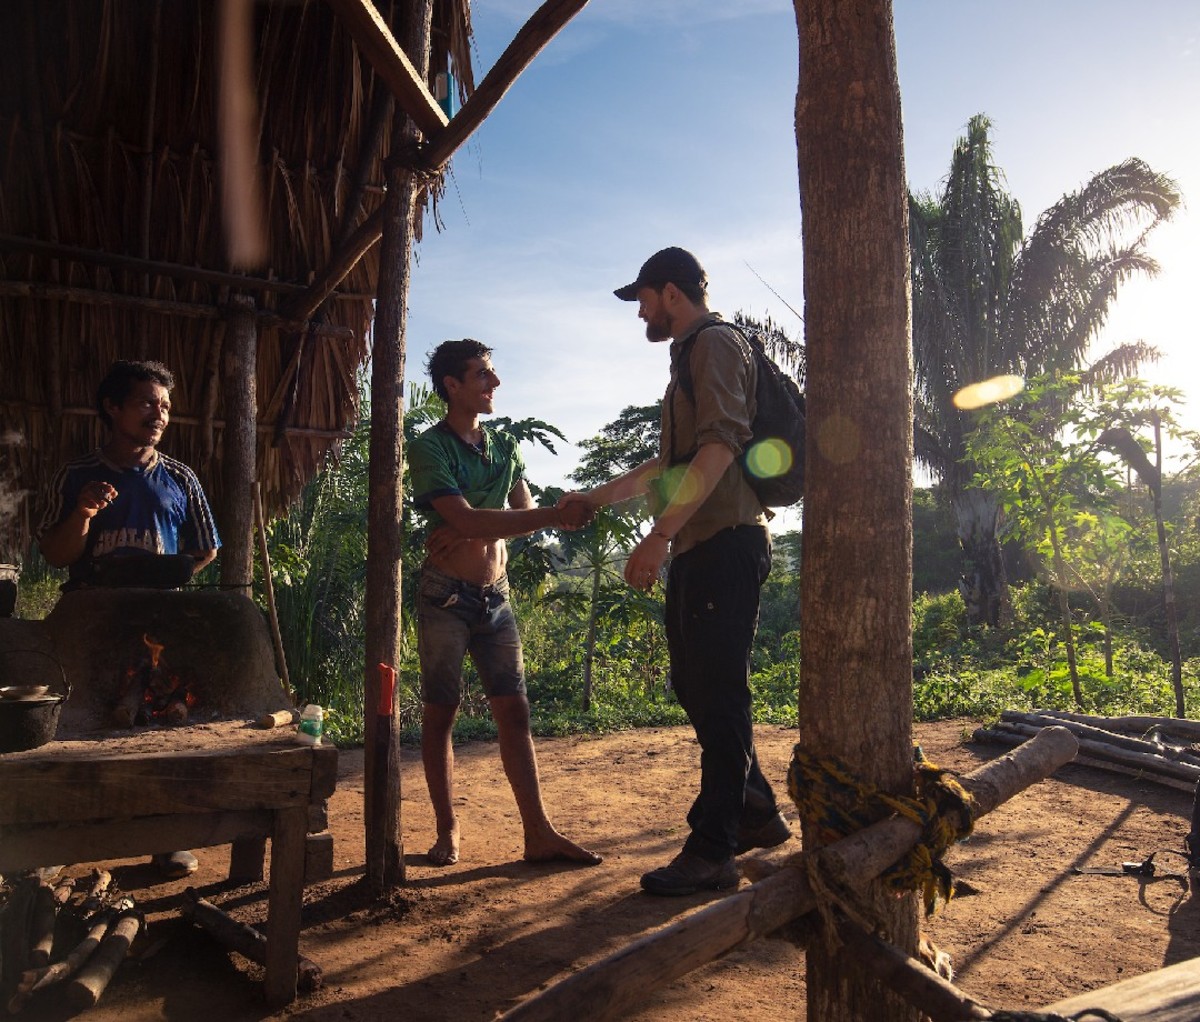 Traveler in Colombia shakes hands with locals in in a rural area.